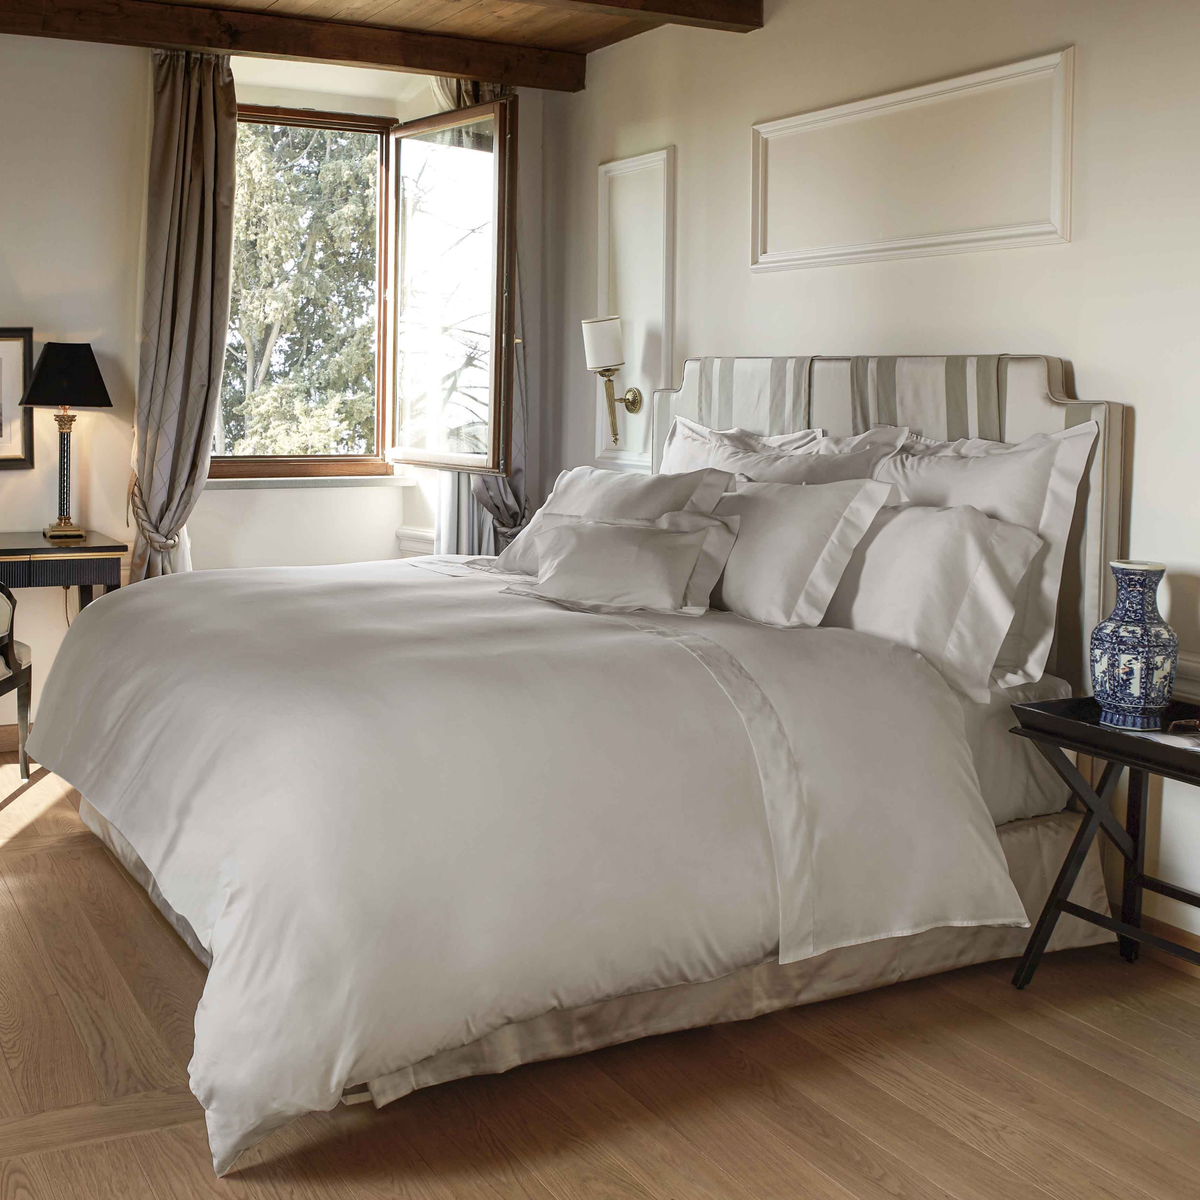 Full Bed Dressed in Signoria Nuvola Bedding in Pearl  Color